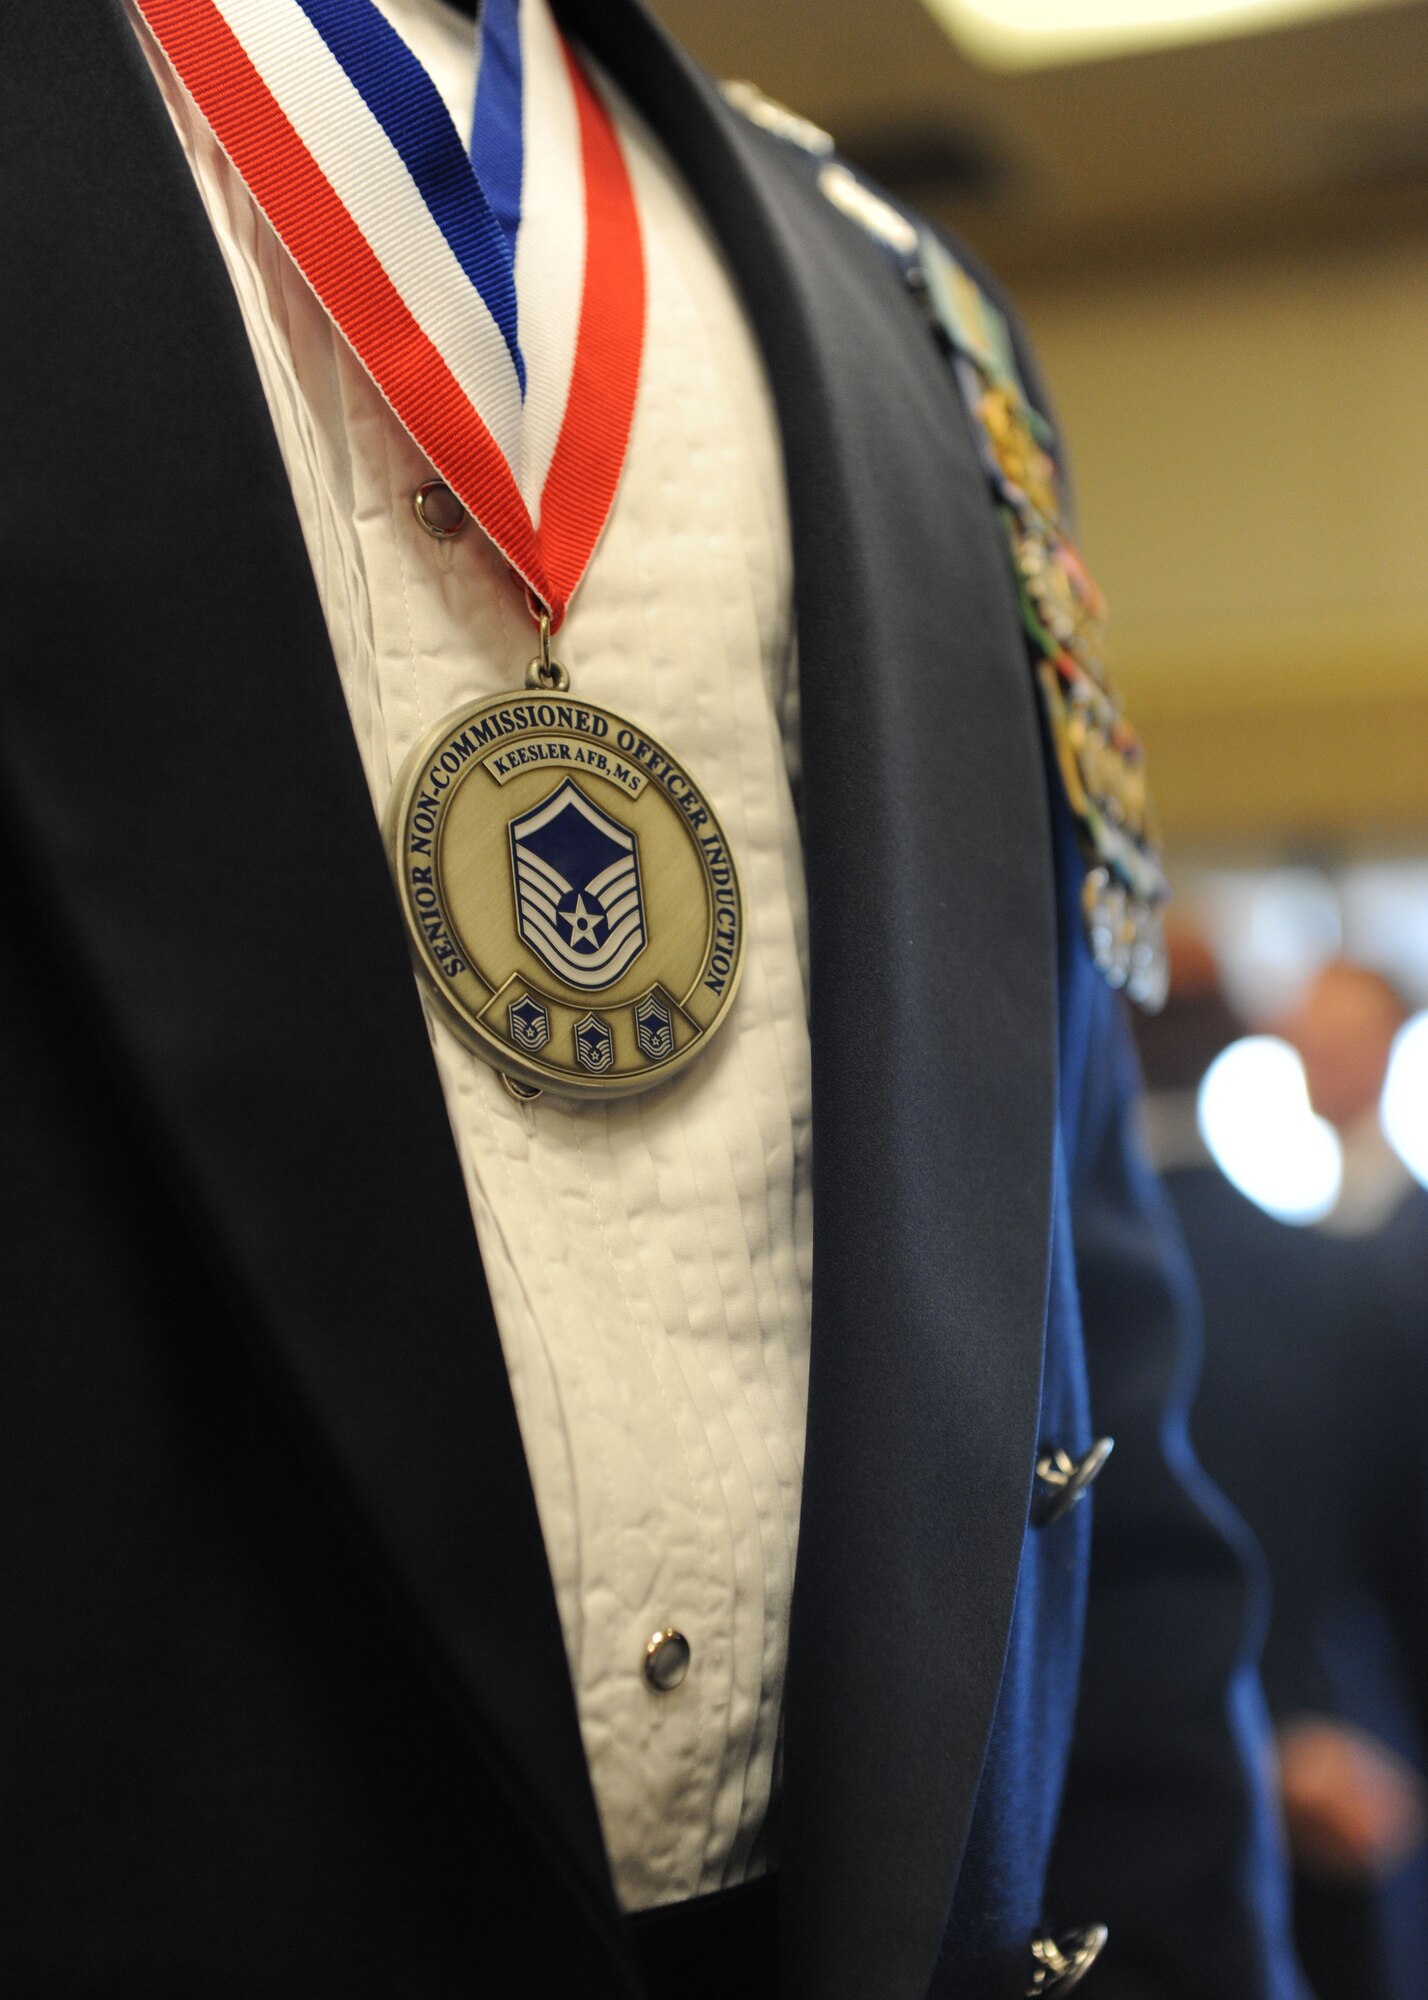 A newly-inducted senior NCO wears his medallion during the Senior Noncommissioned Officer Induction Ceremony at the Bay Breeze Event Center Aug. 18, 2016, on Keesler Air Force Base, Miss. Thirty-seven enlisted members were recognized throughout the event. (U.S. Air Force photo by Kemberly Groue/Released)